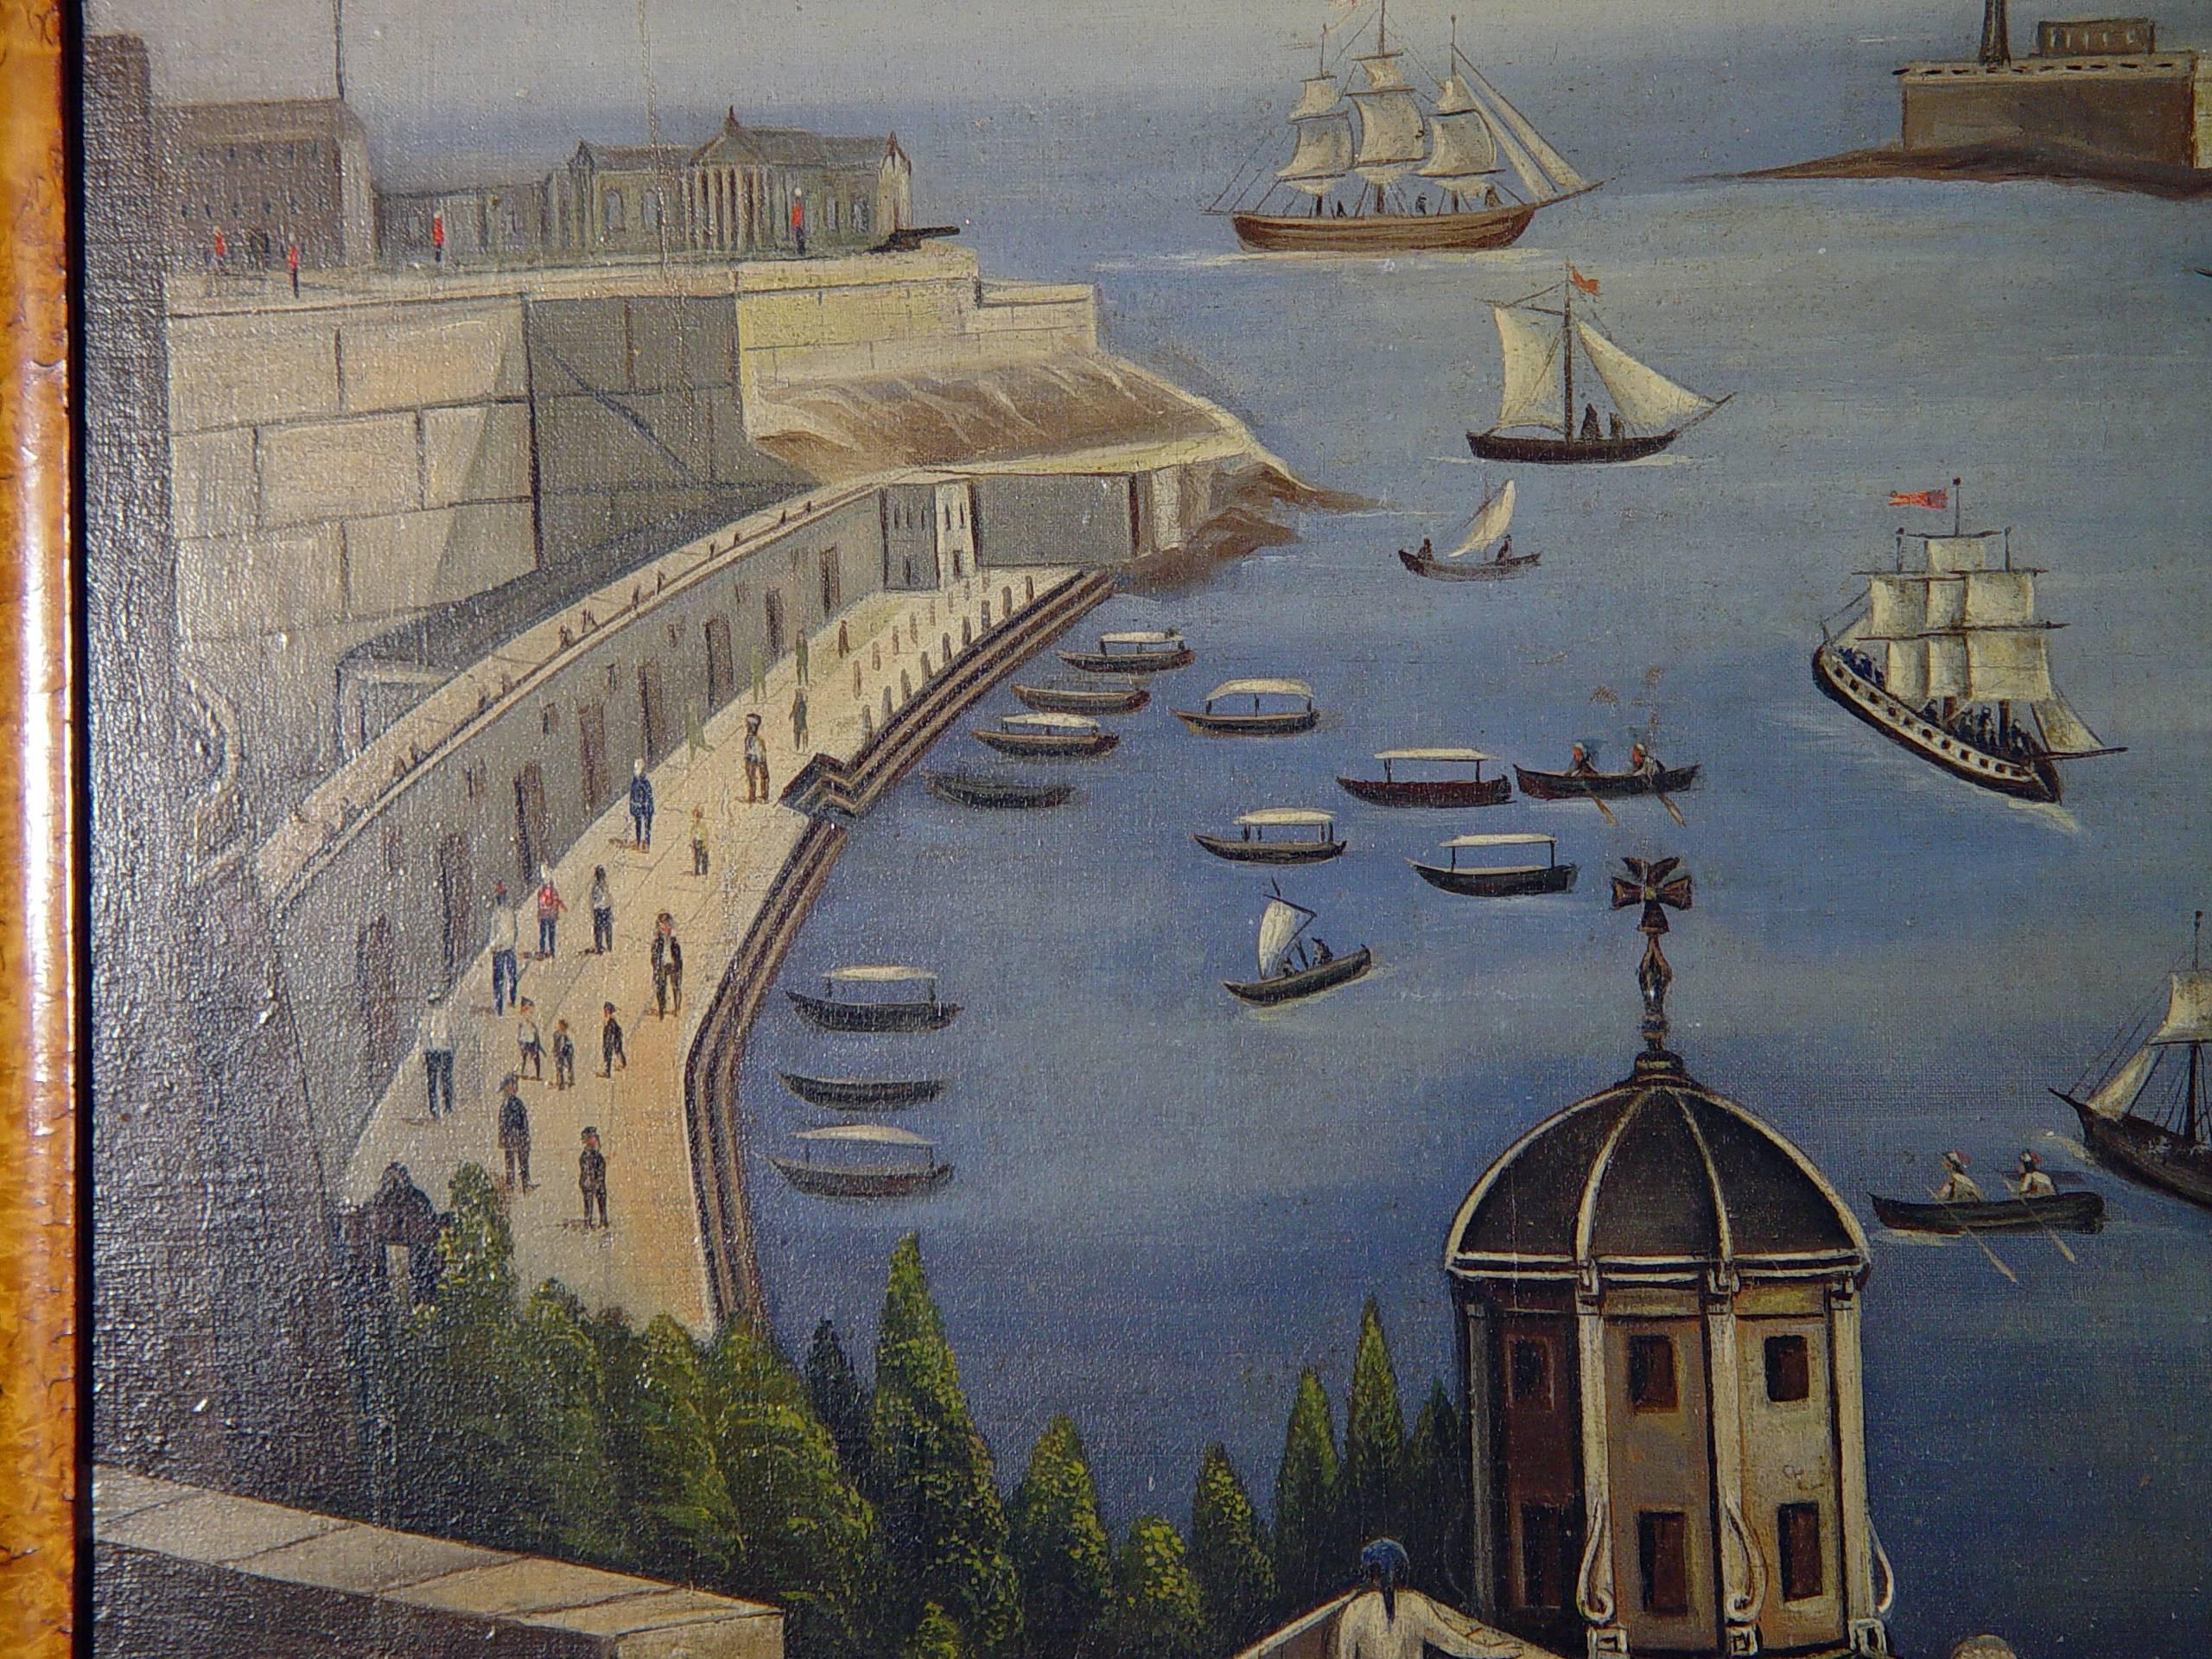 Large Port scene painting of a view of Valletta Harbour, Malta,
Oil on canvas,
Mid-19th century.

The massive painting was made from the upper gardens overlooking the west side of the harbour. It shows the formidable fortifications of the home base